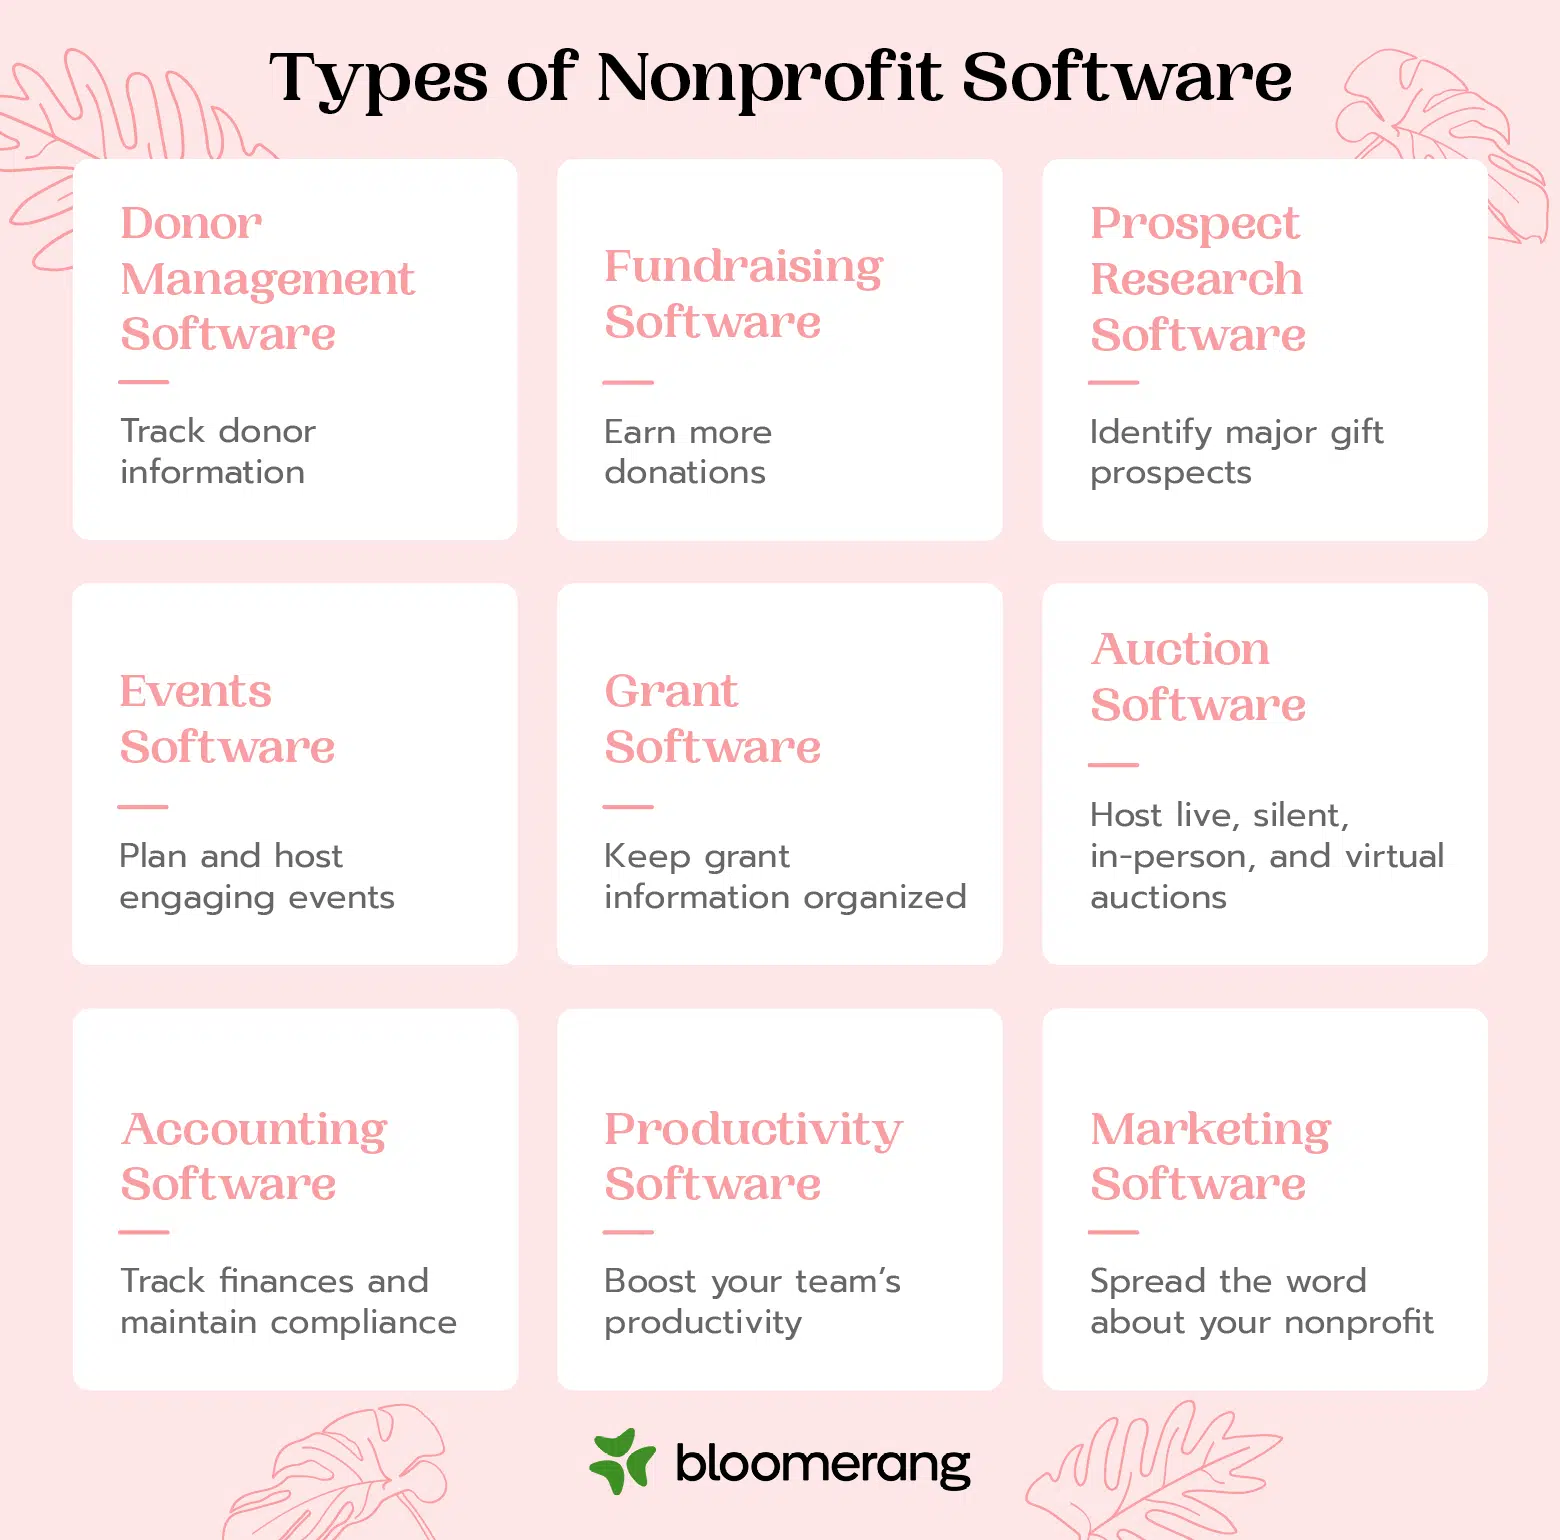 This image shows the different types of nonprofit software we’ll explore in this guide (outlined in the table of contents below). 